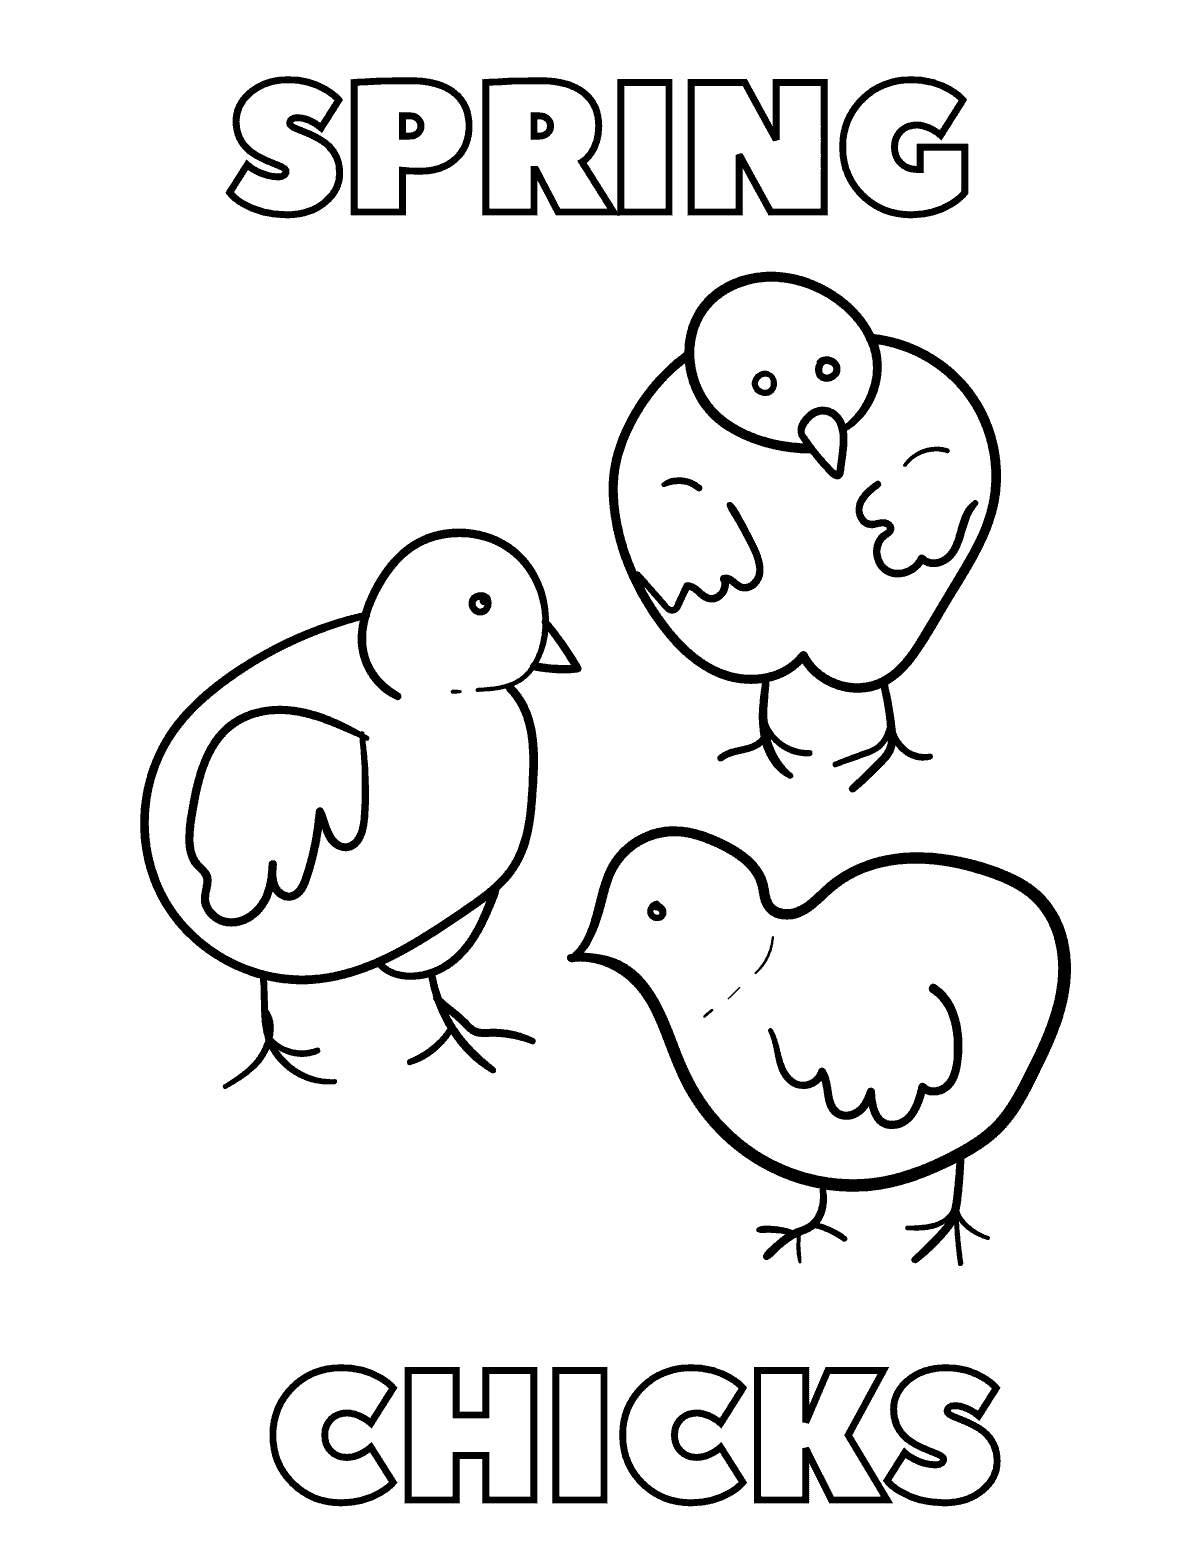 Spring chicken coloring page